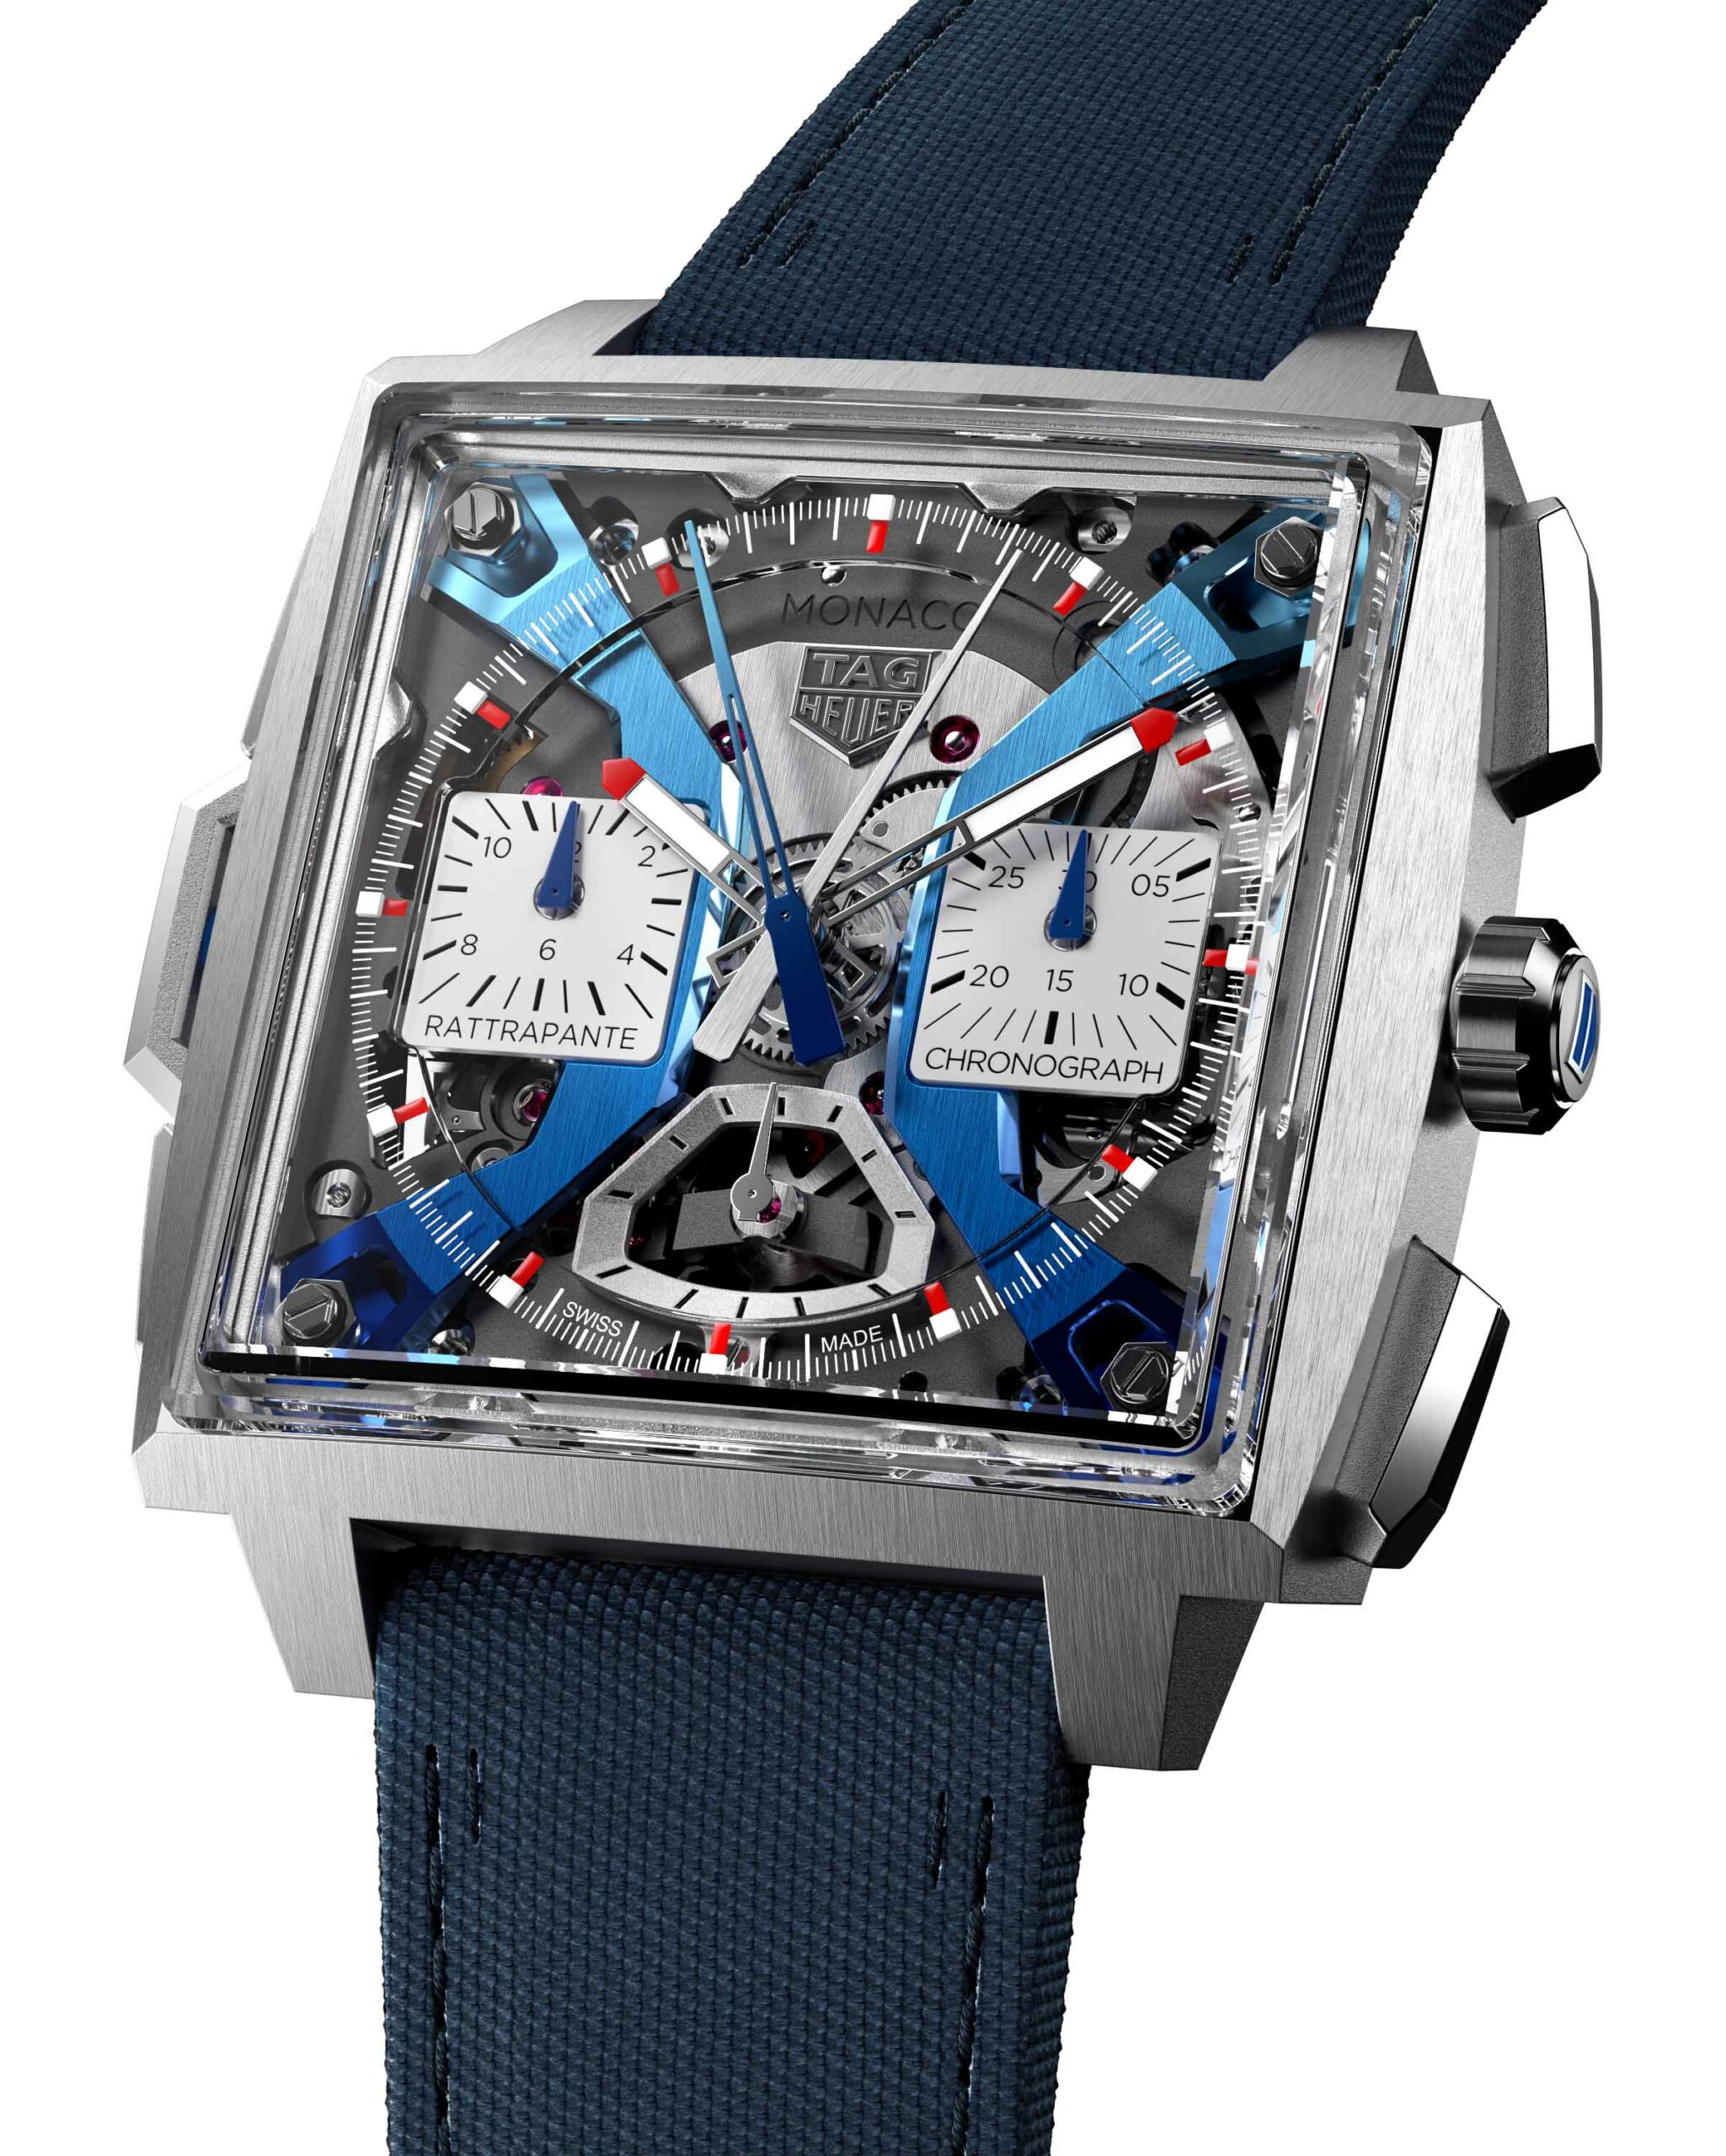 The Most Accurate Fake Luxury TAG Heuer Watches In The World